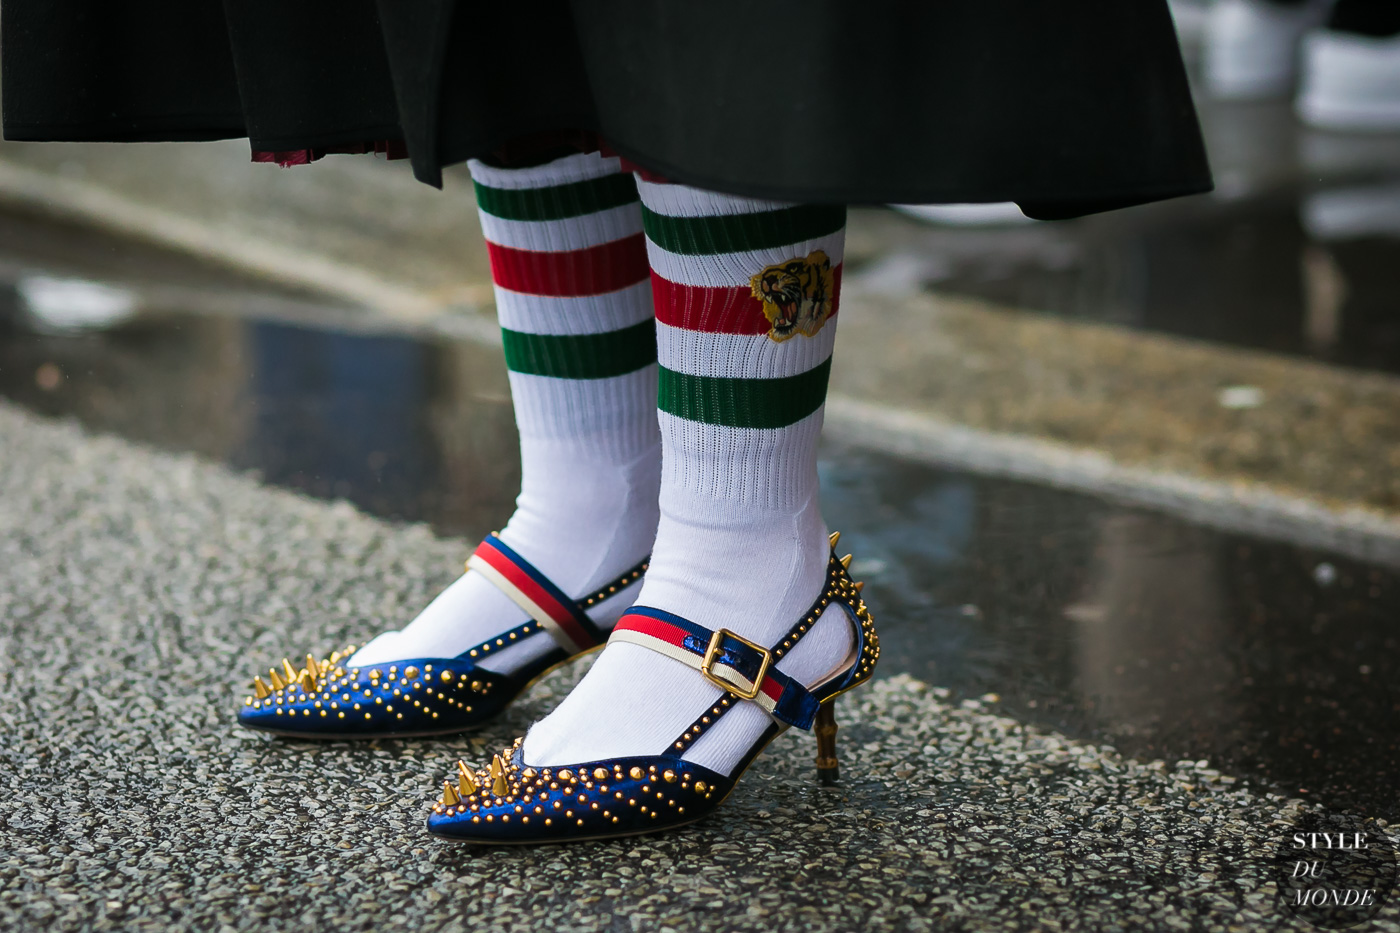 Gucci shoes and socks